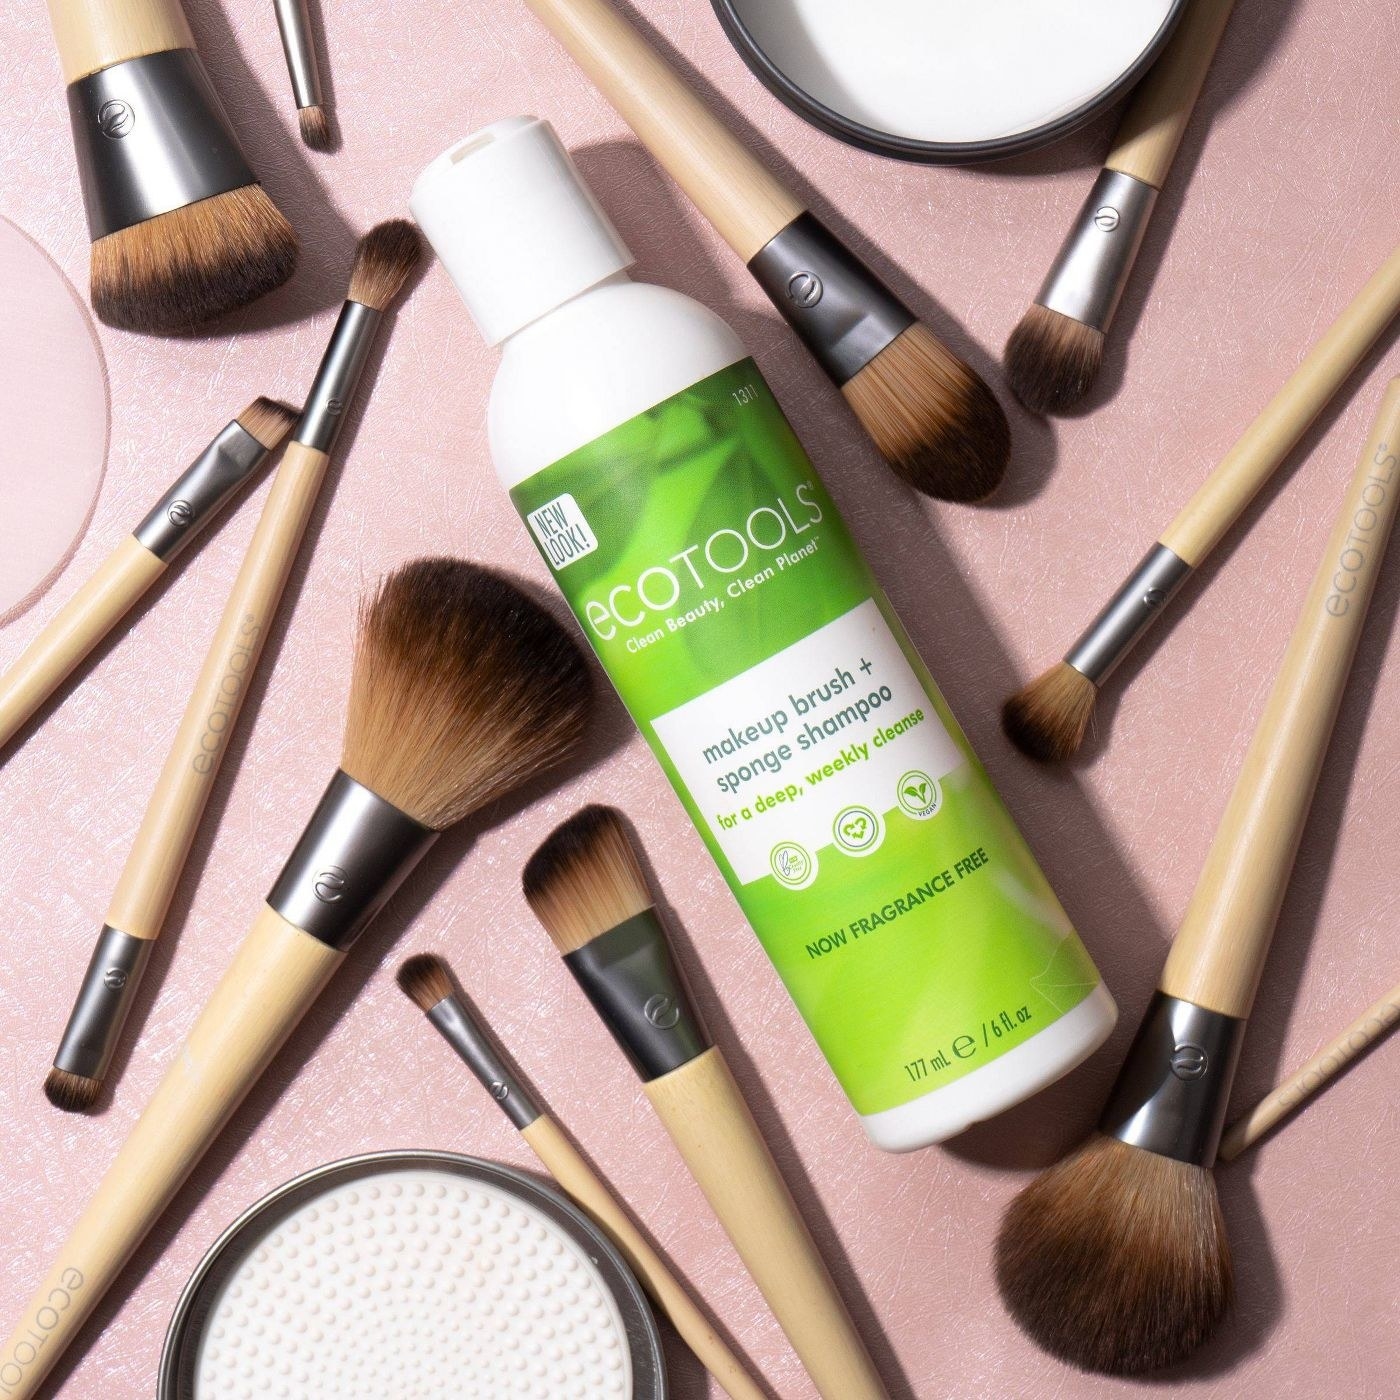 The EcoTools Makeup Brush Cleansing Shampoo